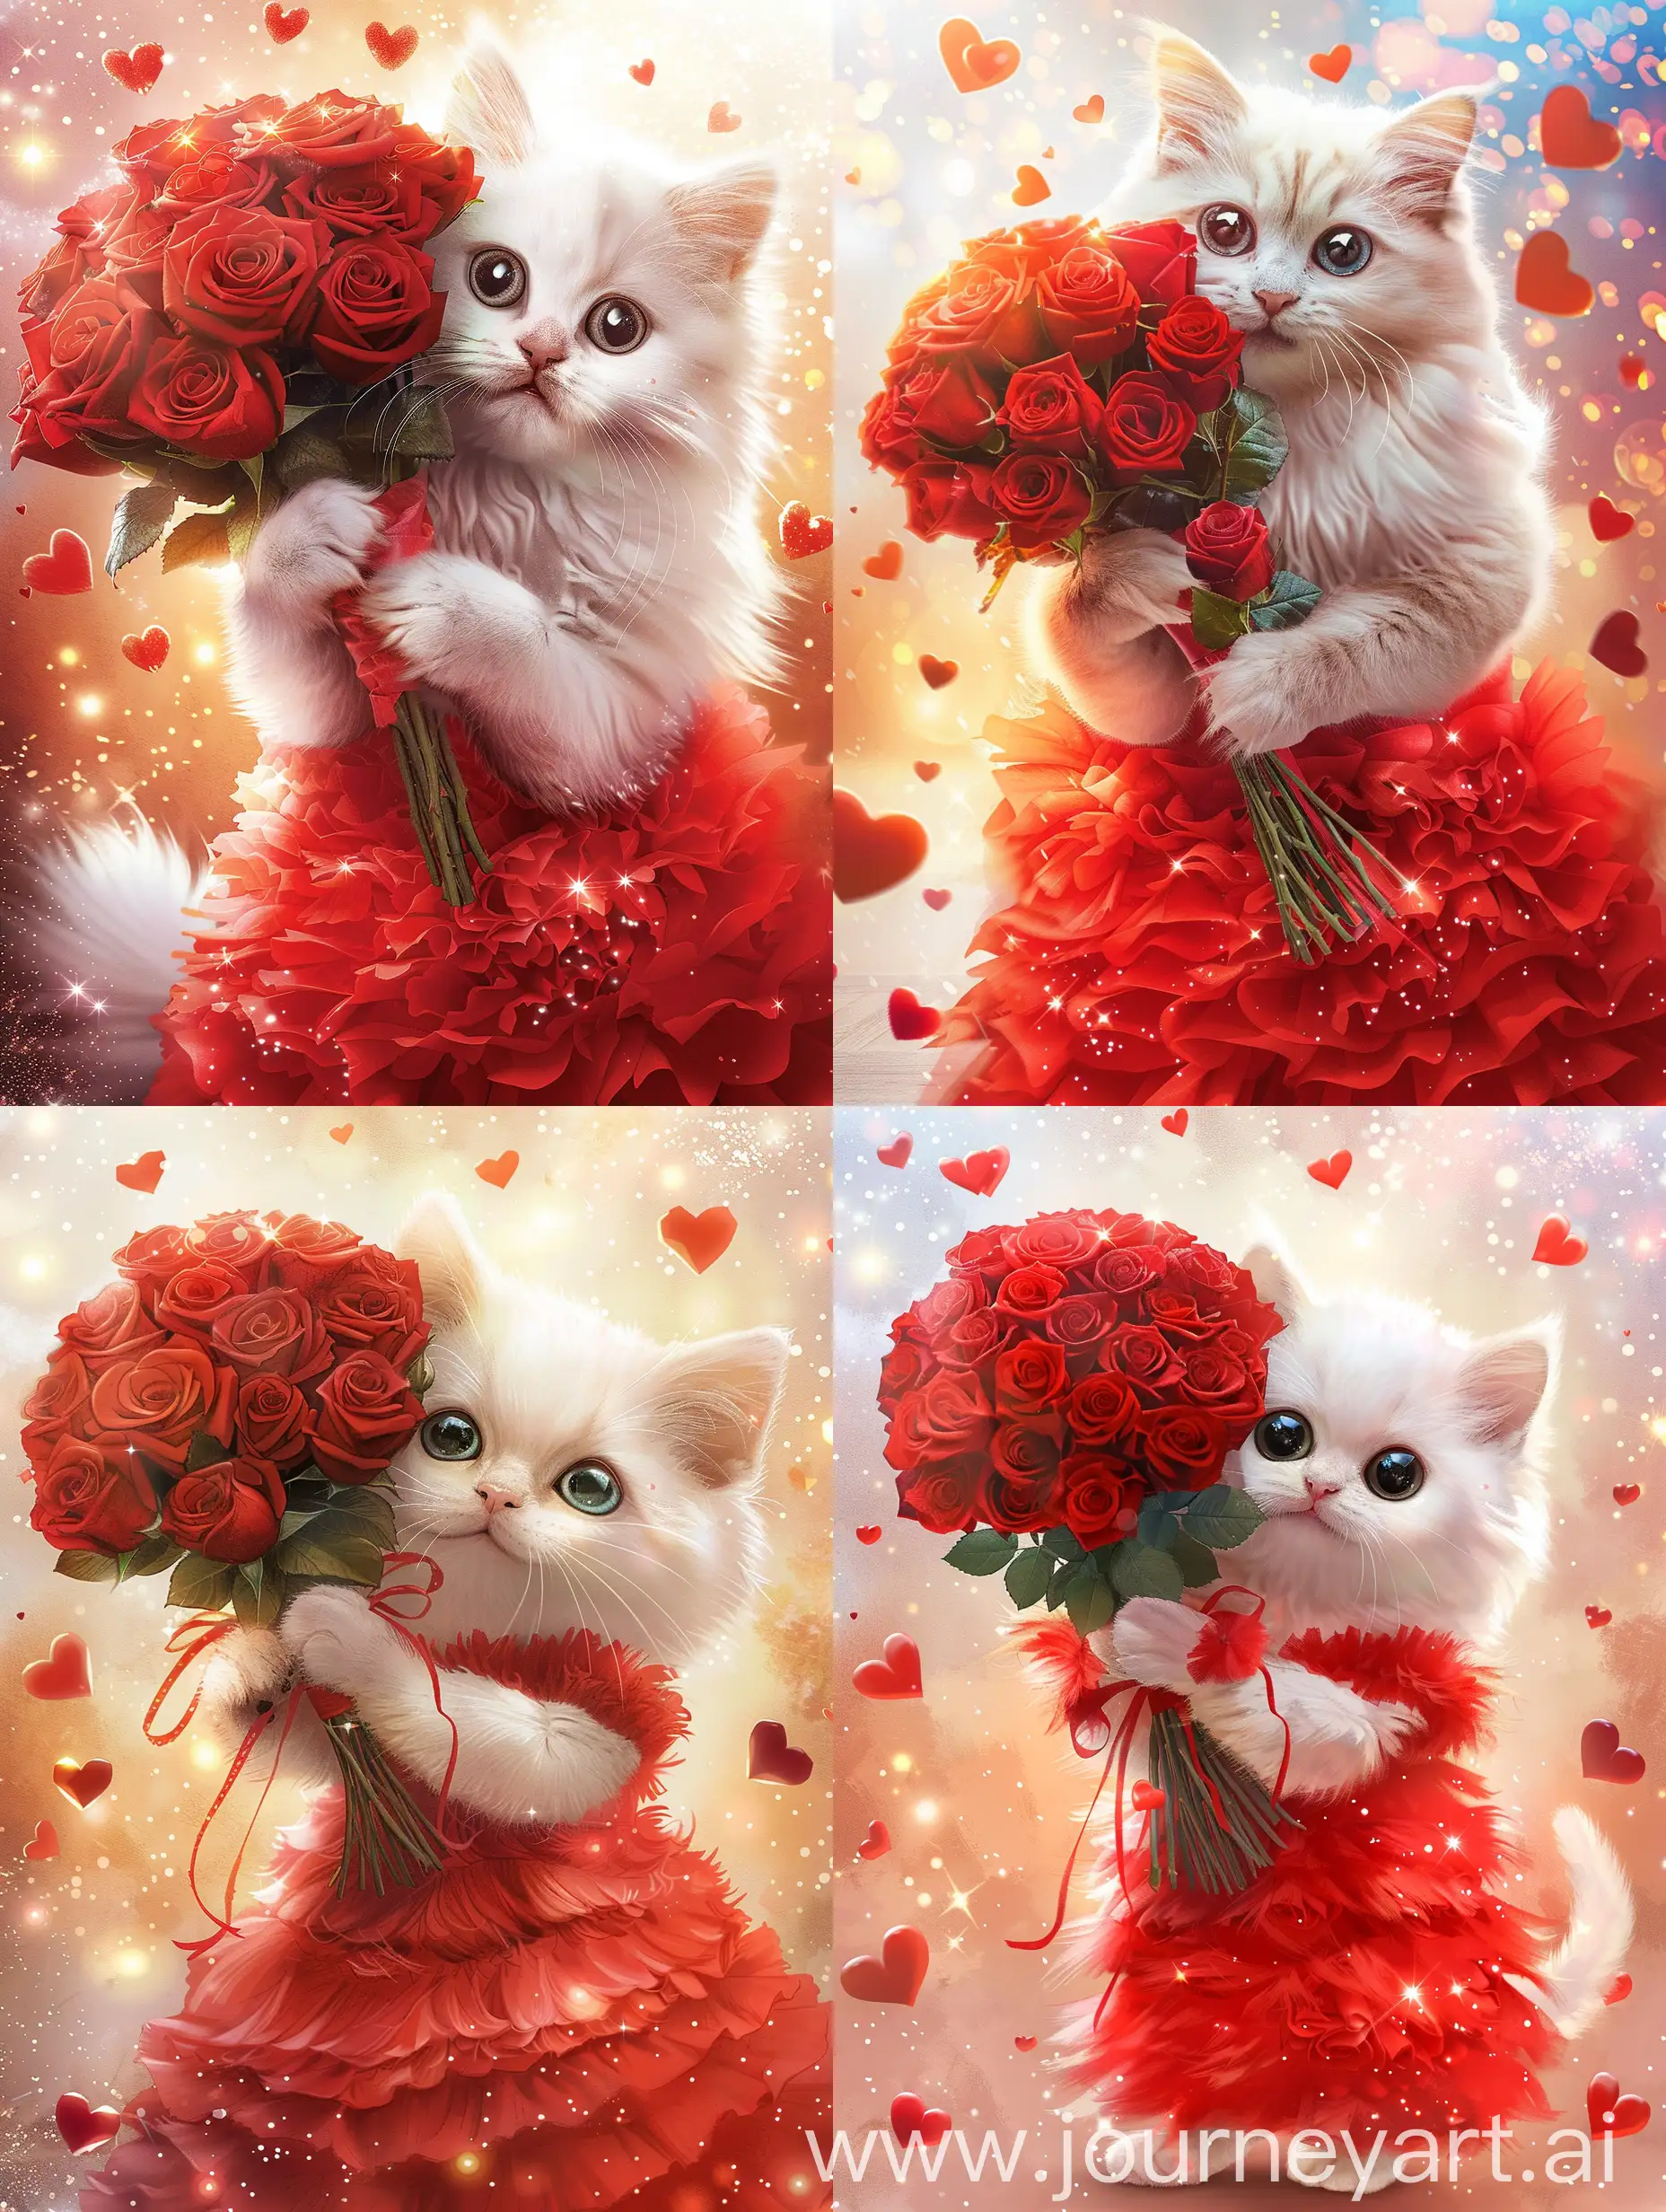 Smiling-White-Cat-in-Red-Dress-Holding-Bouquet-of-Roses